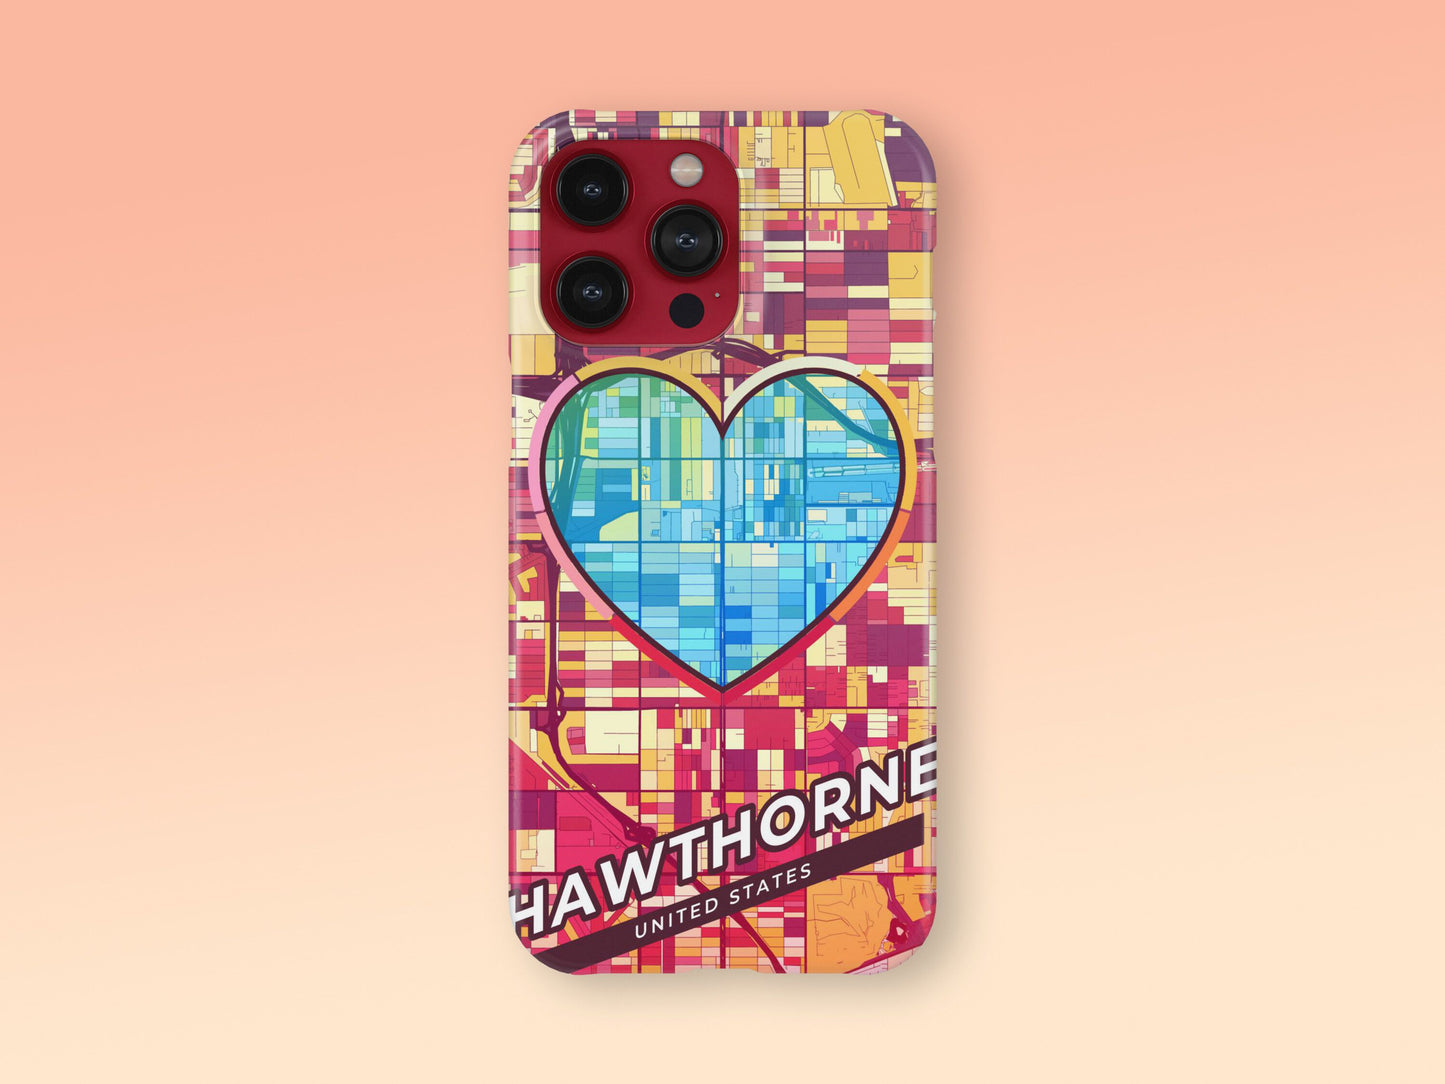 Hawthorne California slim phone case with colorful icon. Birthday, wedding or housewarming gift. Couple match cases. 2